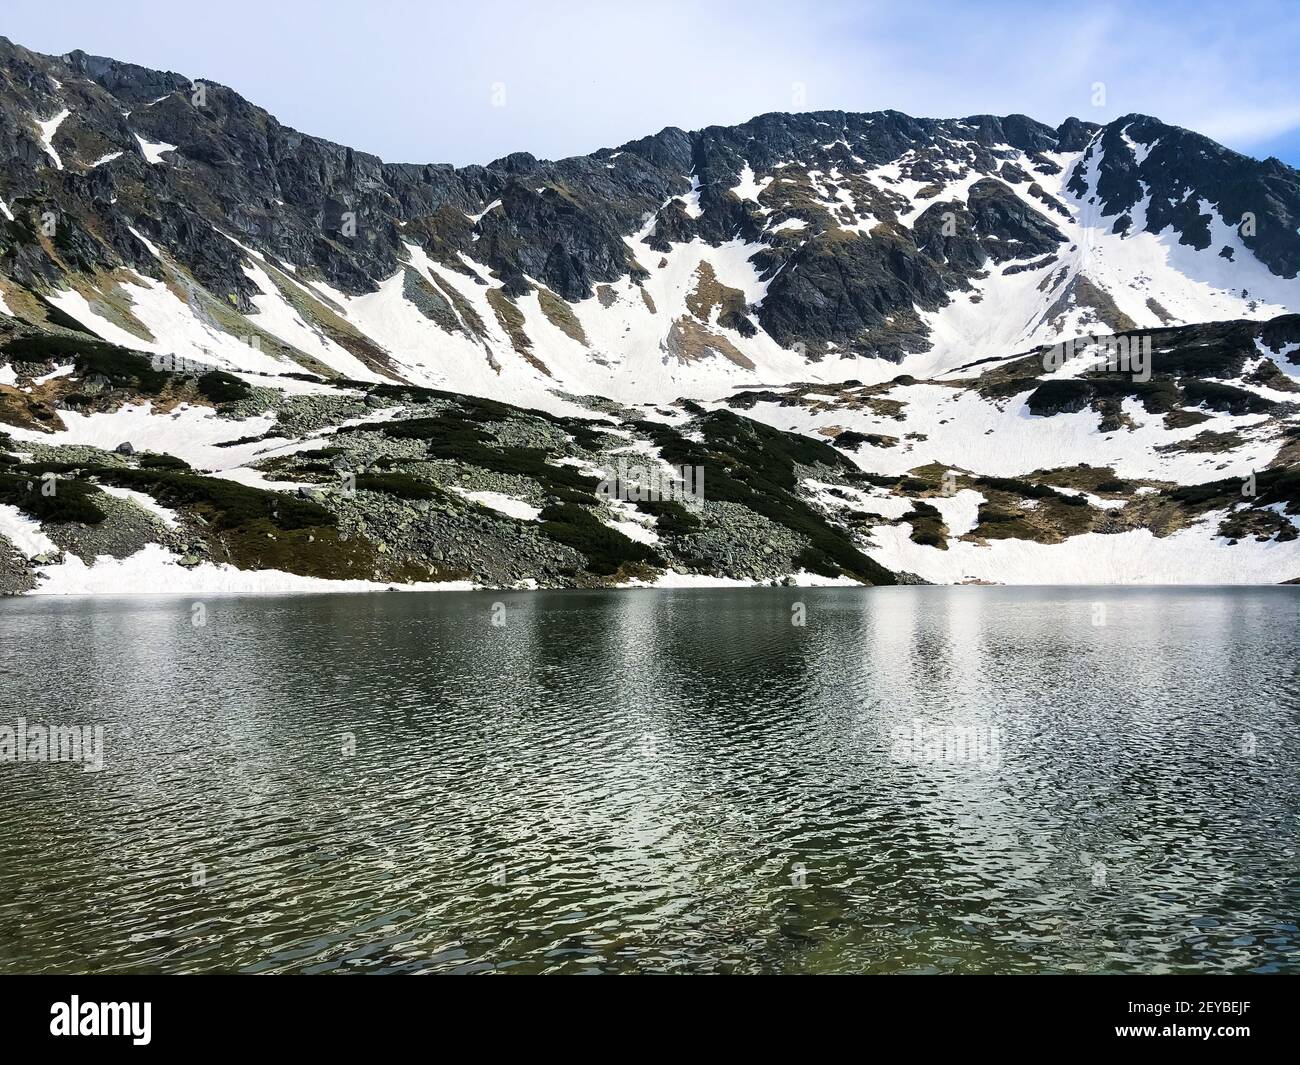 Stunning mountainscape reflecting in the water, winter nature of the Five Polish Ponds Valley Stock Photo